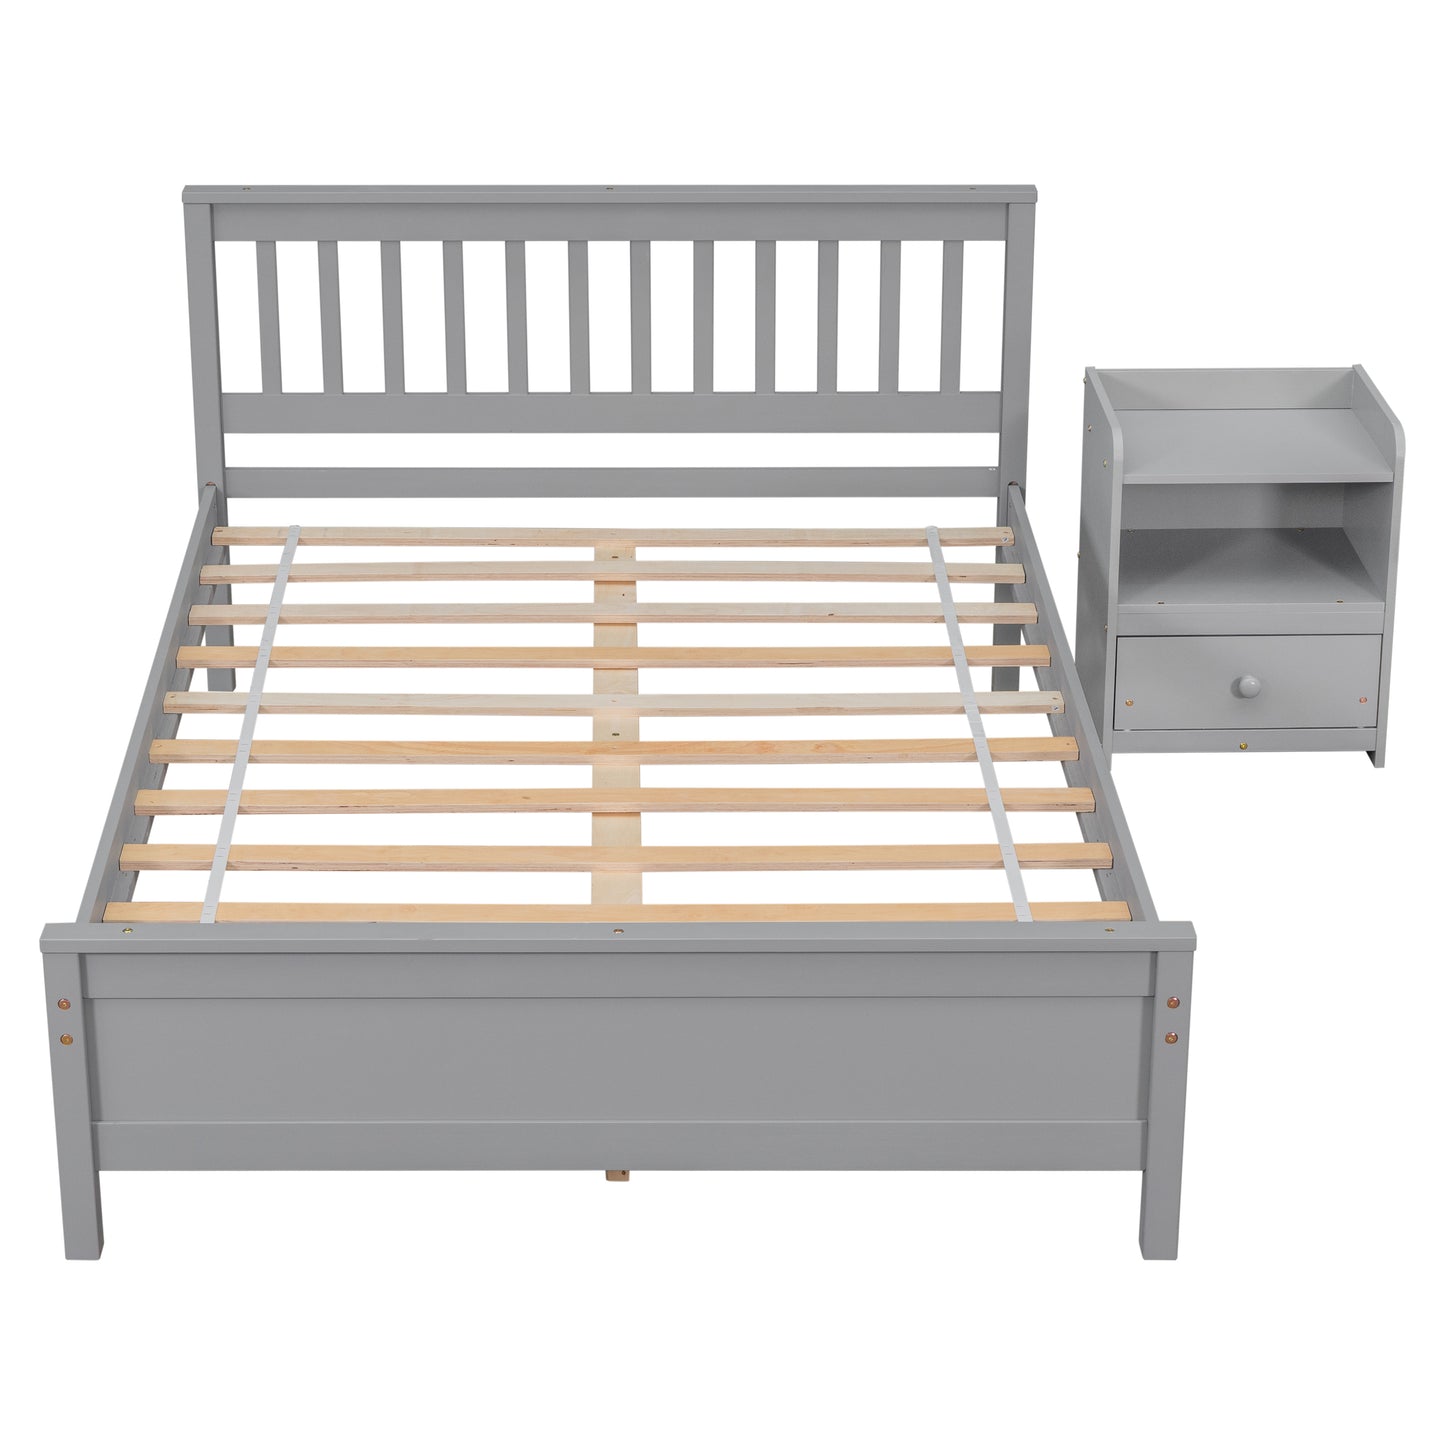 2 Piece Twin Size Platform Bed Frame Set with A Nightstand, Headboard and Footboard, Modern Wood Bedside Table with Drawer Storage, Gray